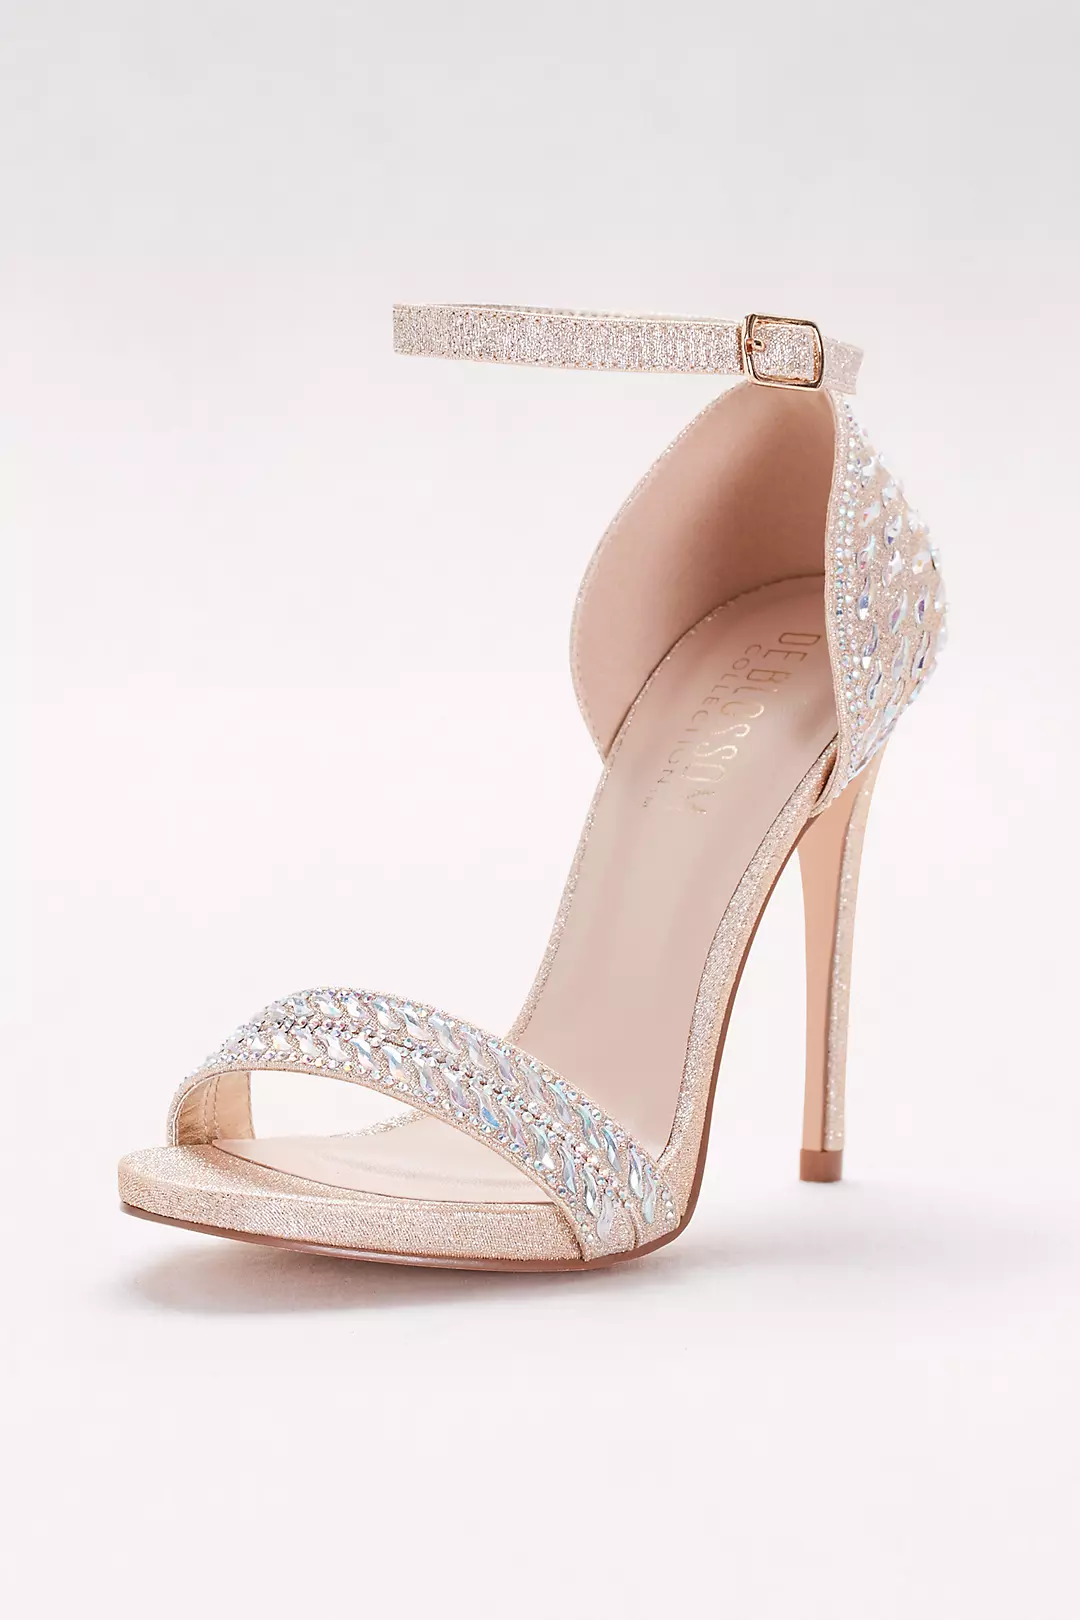 Metallic Ankle-Strap Sandals with Iridescent Gems Image